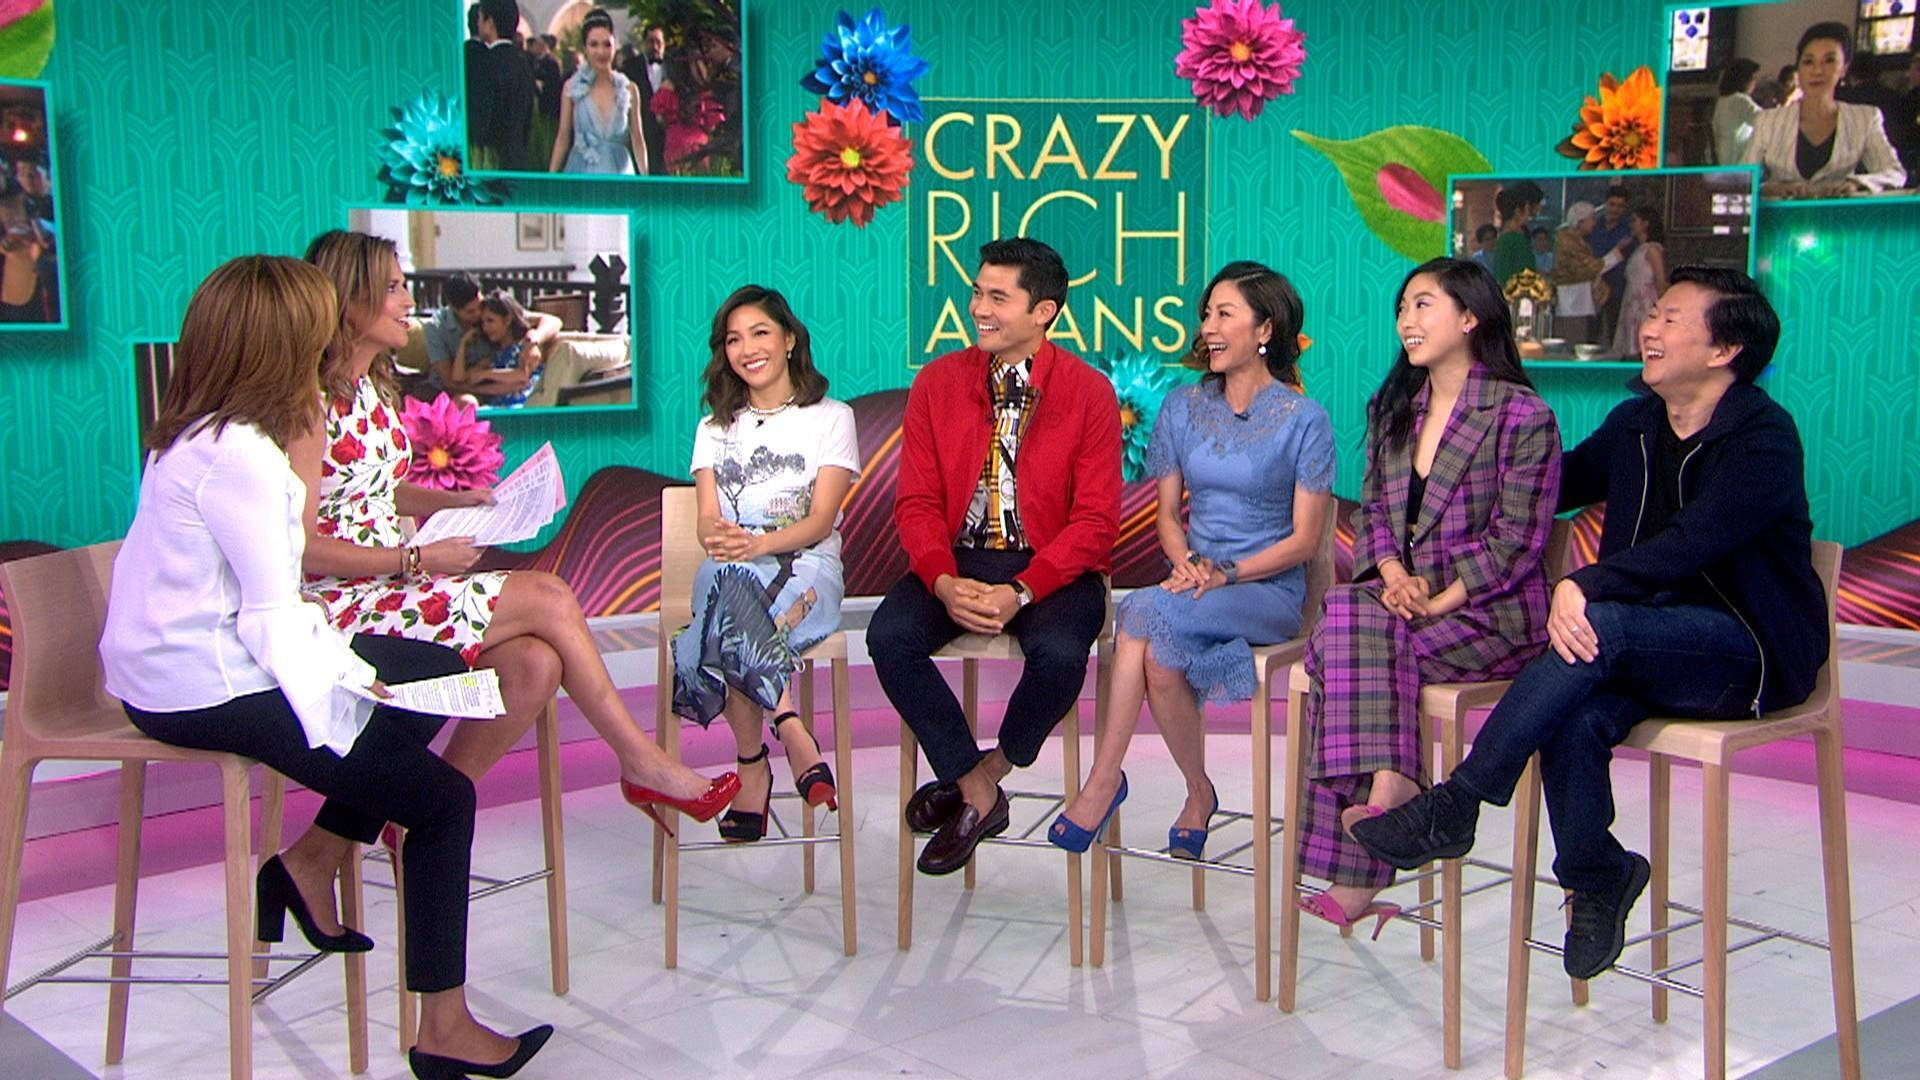 A Joyful Moment With Rachel And Nick From Crazy Rich Asians Movie Background